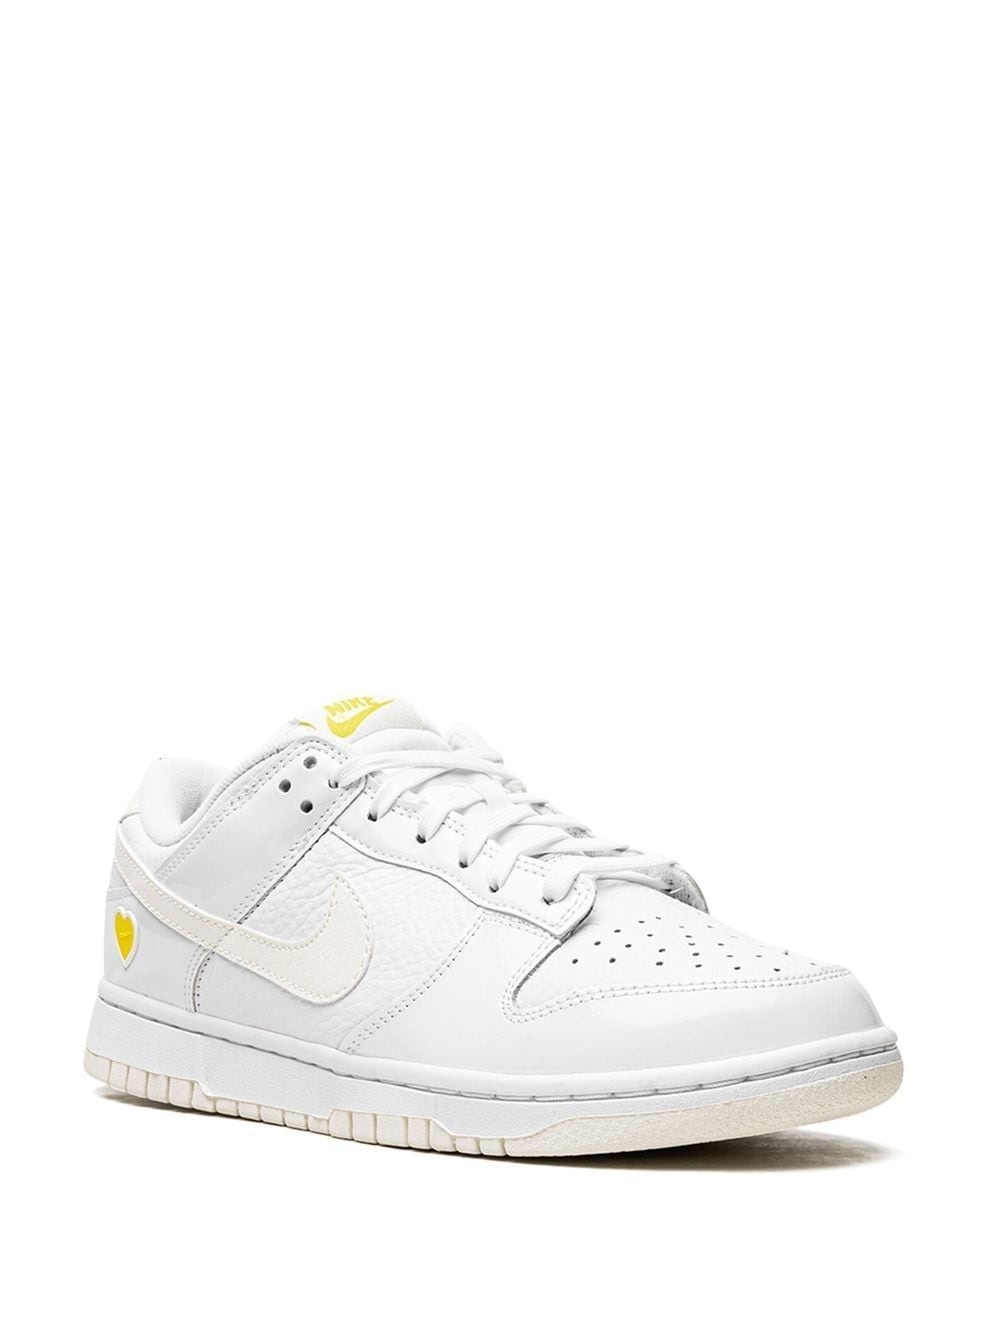 Dunk Low "Yellow Heart" sneakers - 2